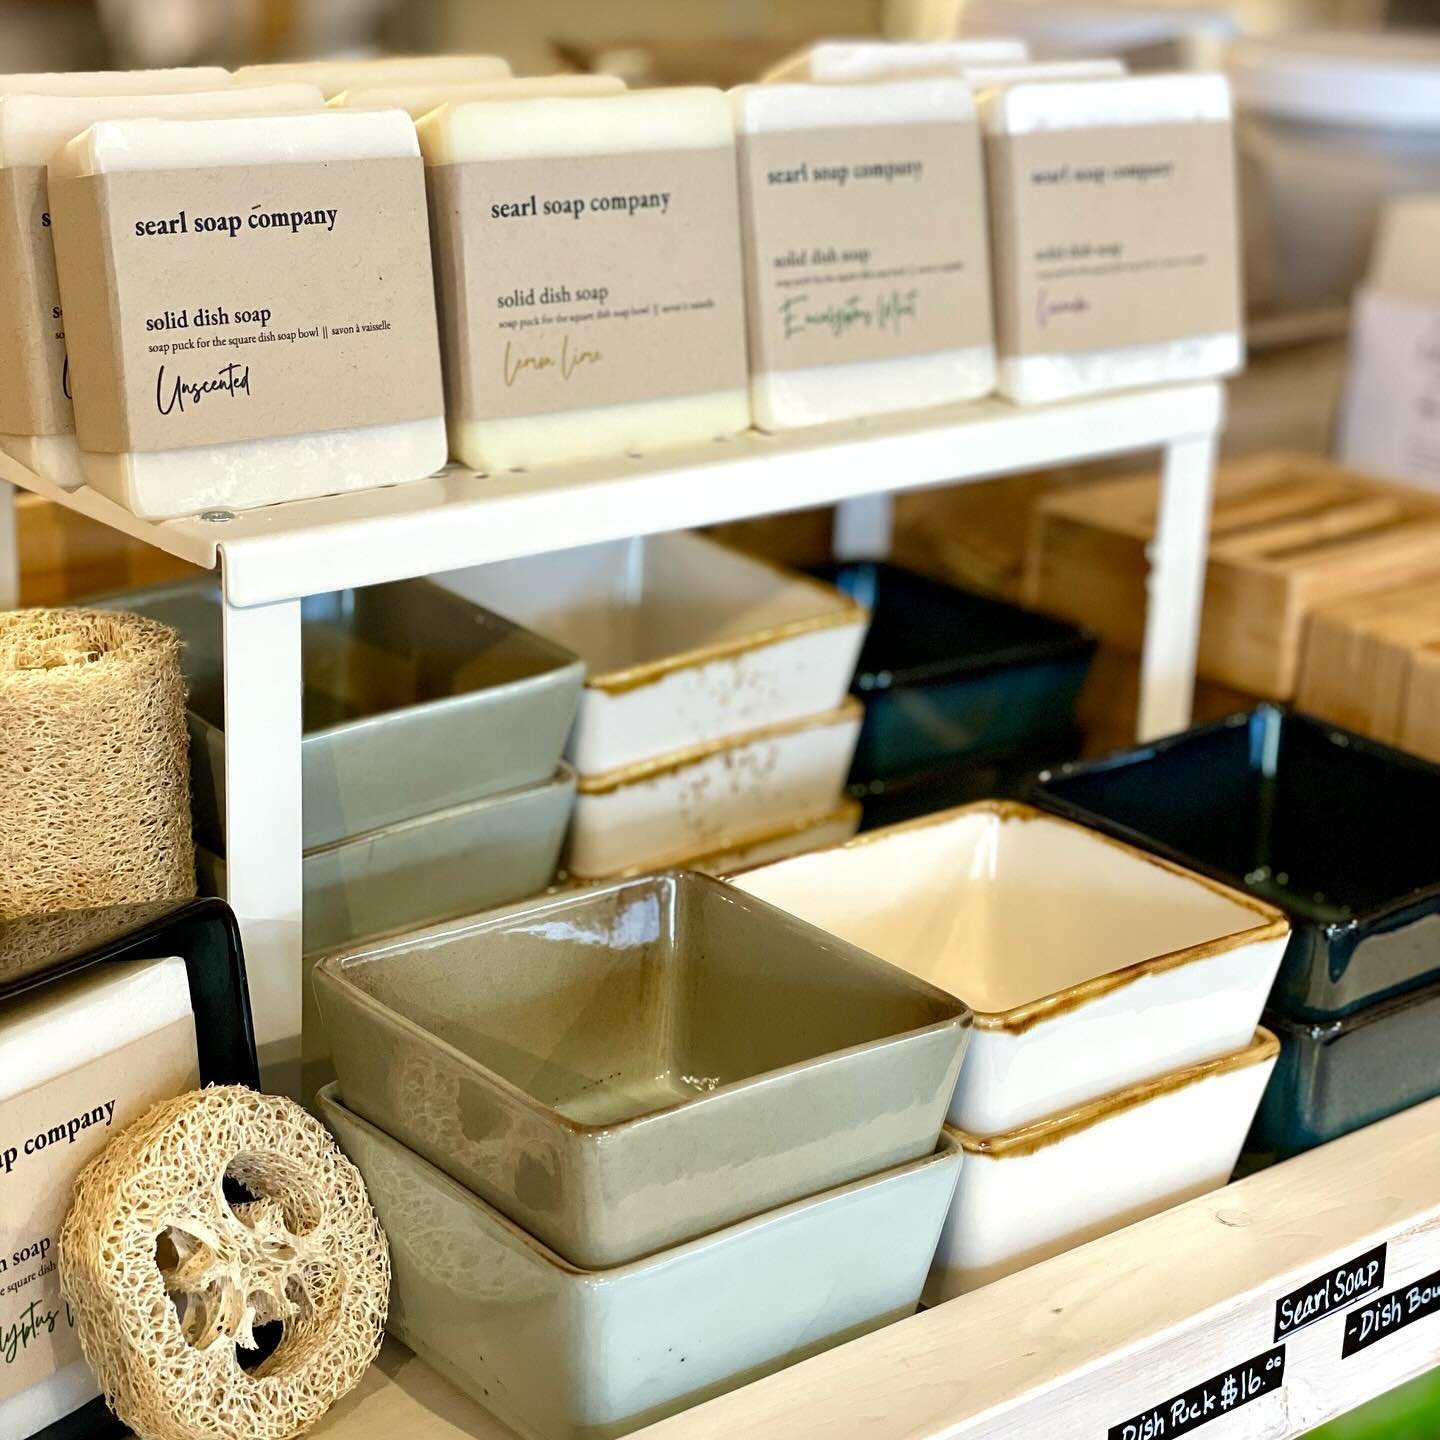 Have you seen our beautiful @searl_soap_company products yet? We haven&rsquo;t had a chance to do a proper introduction, because they keep flying off the shelves &amp; we don&rsquo;t want to show you something we don&rsquo;t have! But we recently got